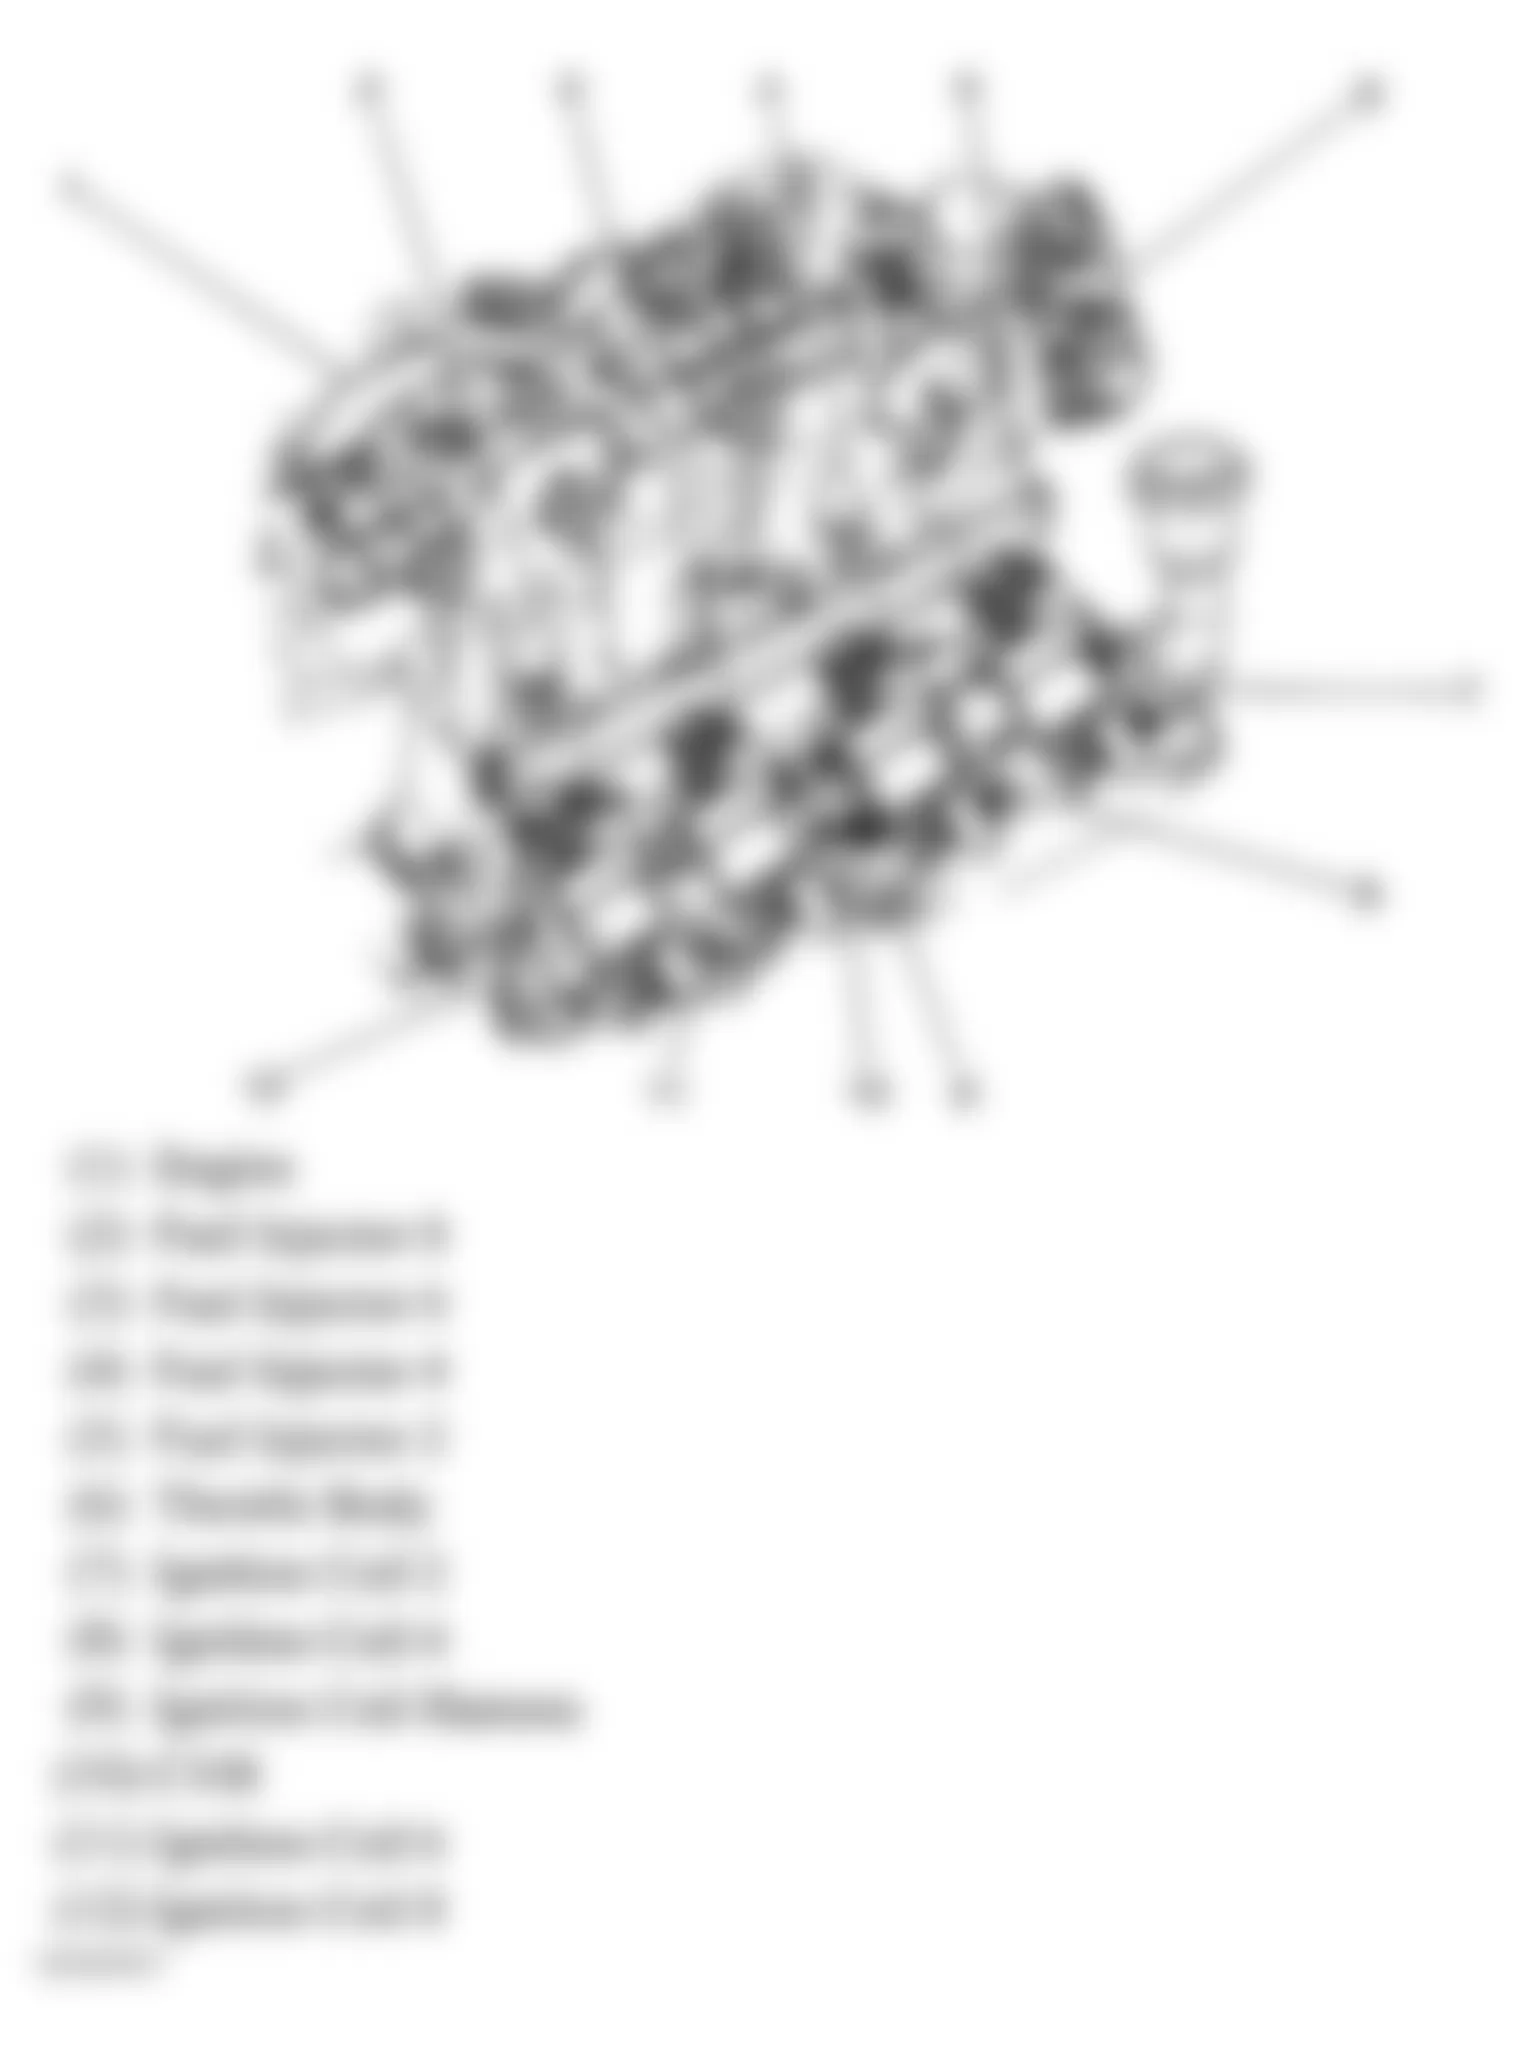 GMC Envoy XL 2006 - Component Locations -  Upper Right Side Of Engine (5.3L/6.0L)